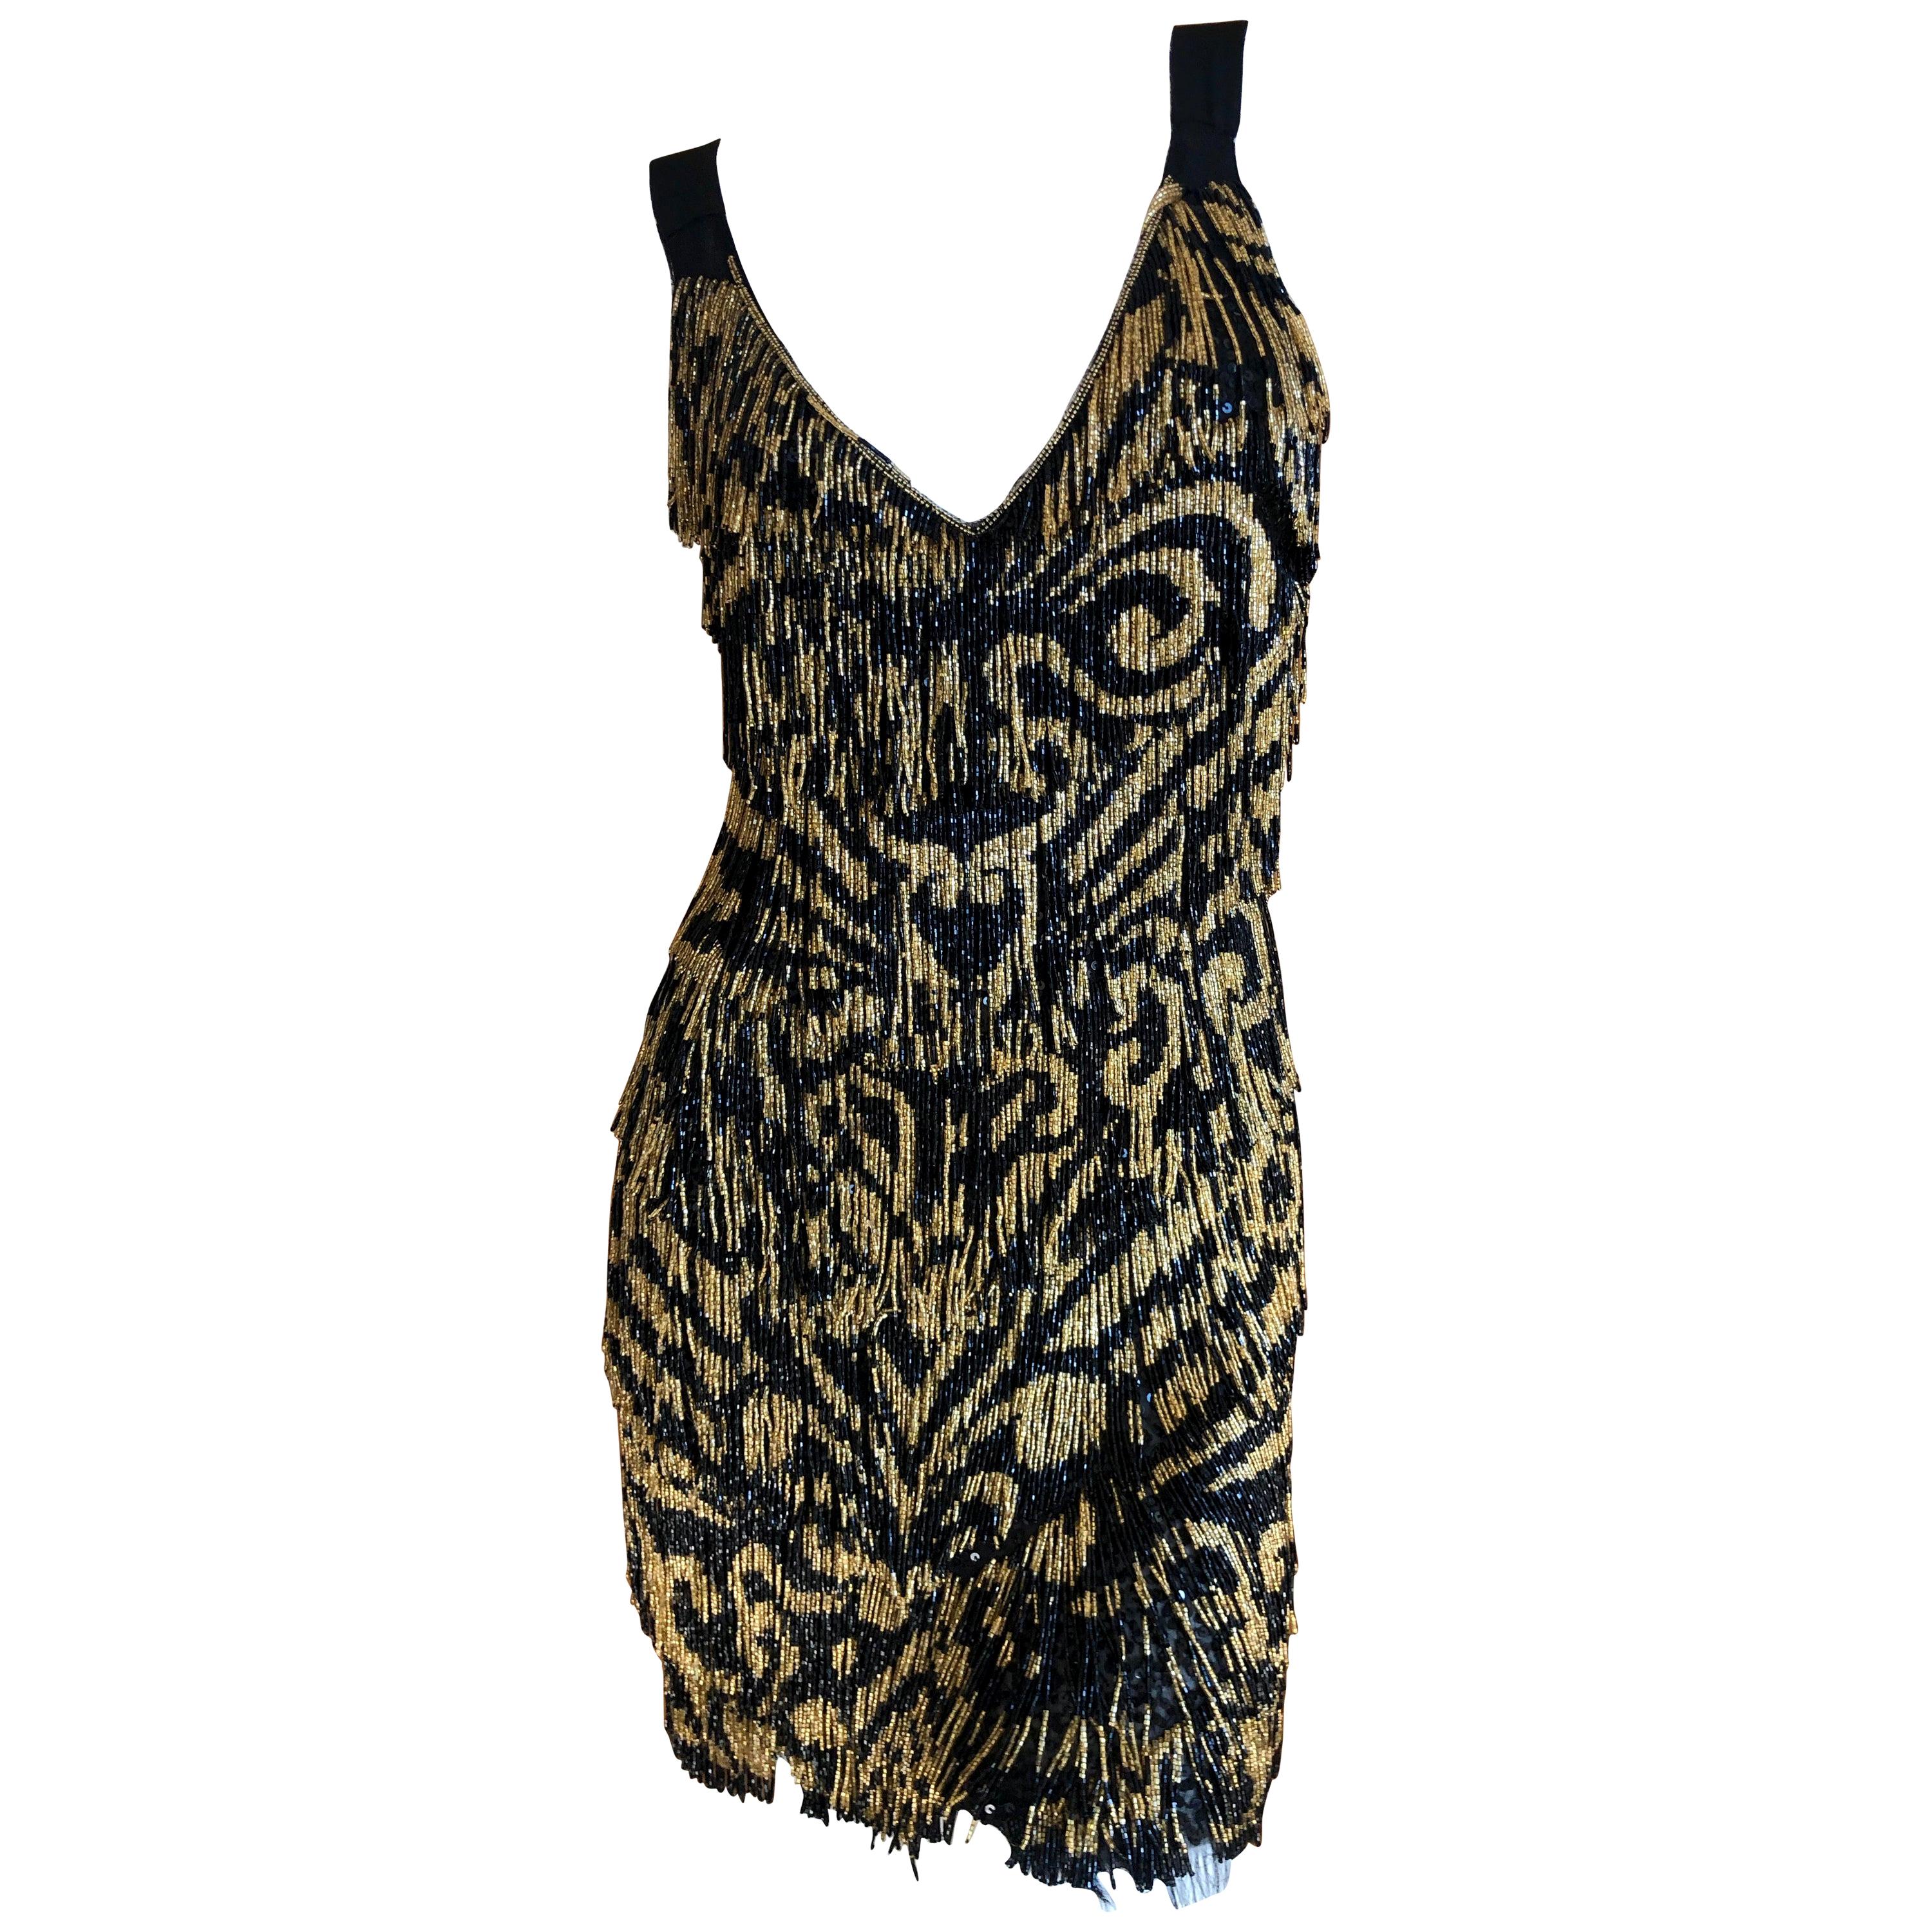 Emilio Pucci Flapper Style Black & Gold Glass Bead Fringed Mini Dress New / Tags For Sale